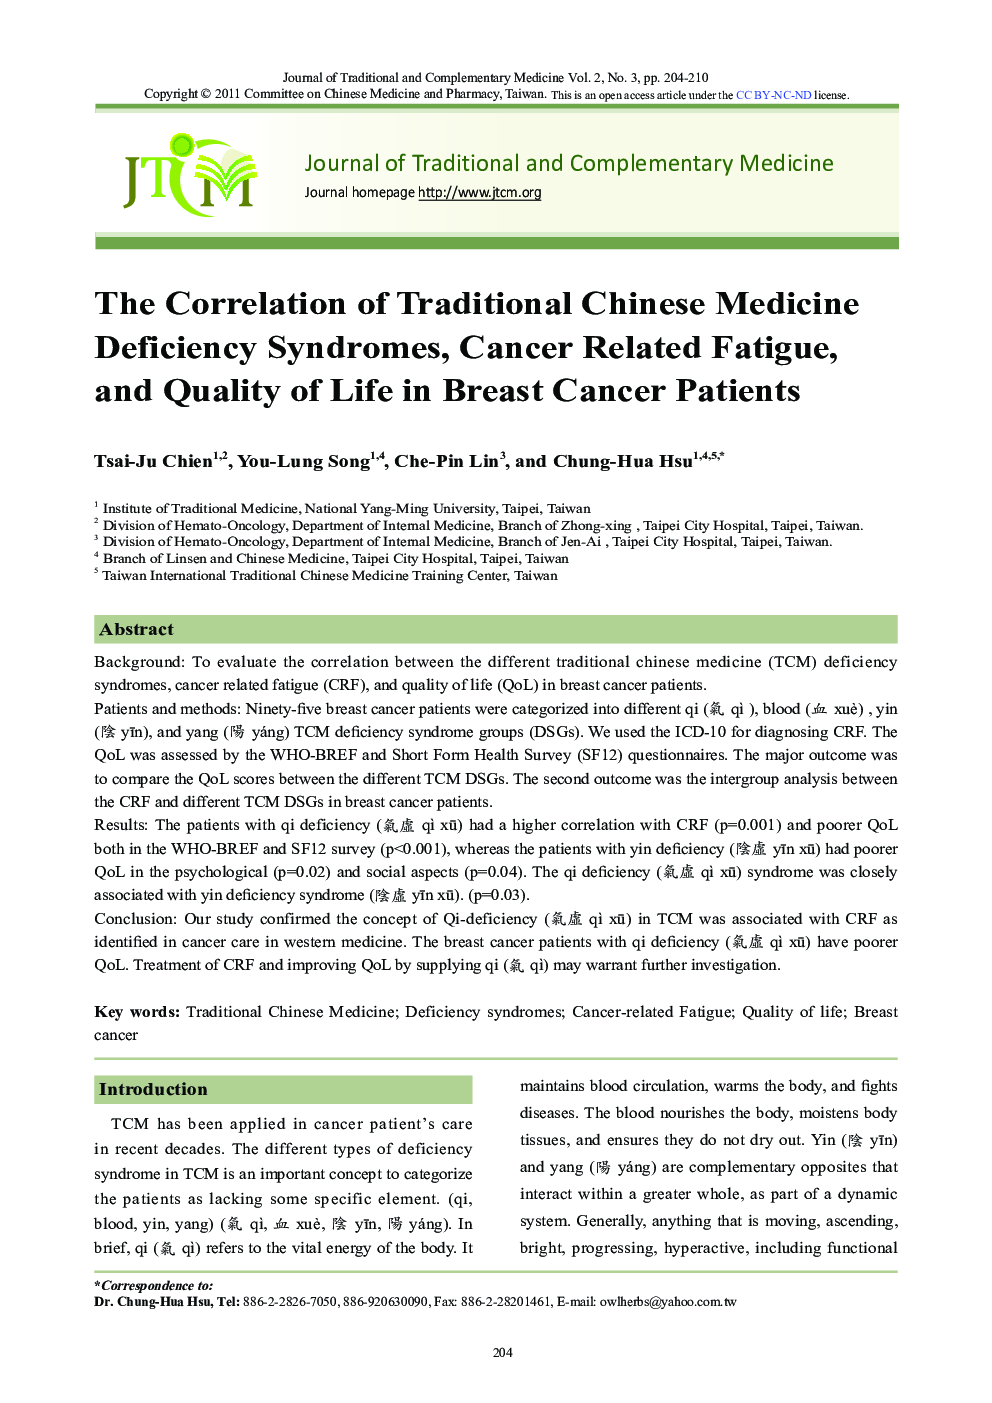 The Correlation of Traditional Chinese Medicine Deficiency Syndromes, Cancer Related Fatigue, and Quality of Life in Breast Cancer Patients